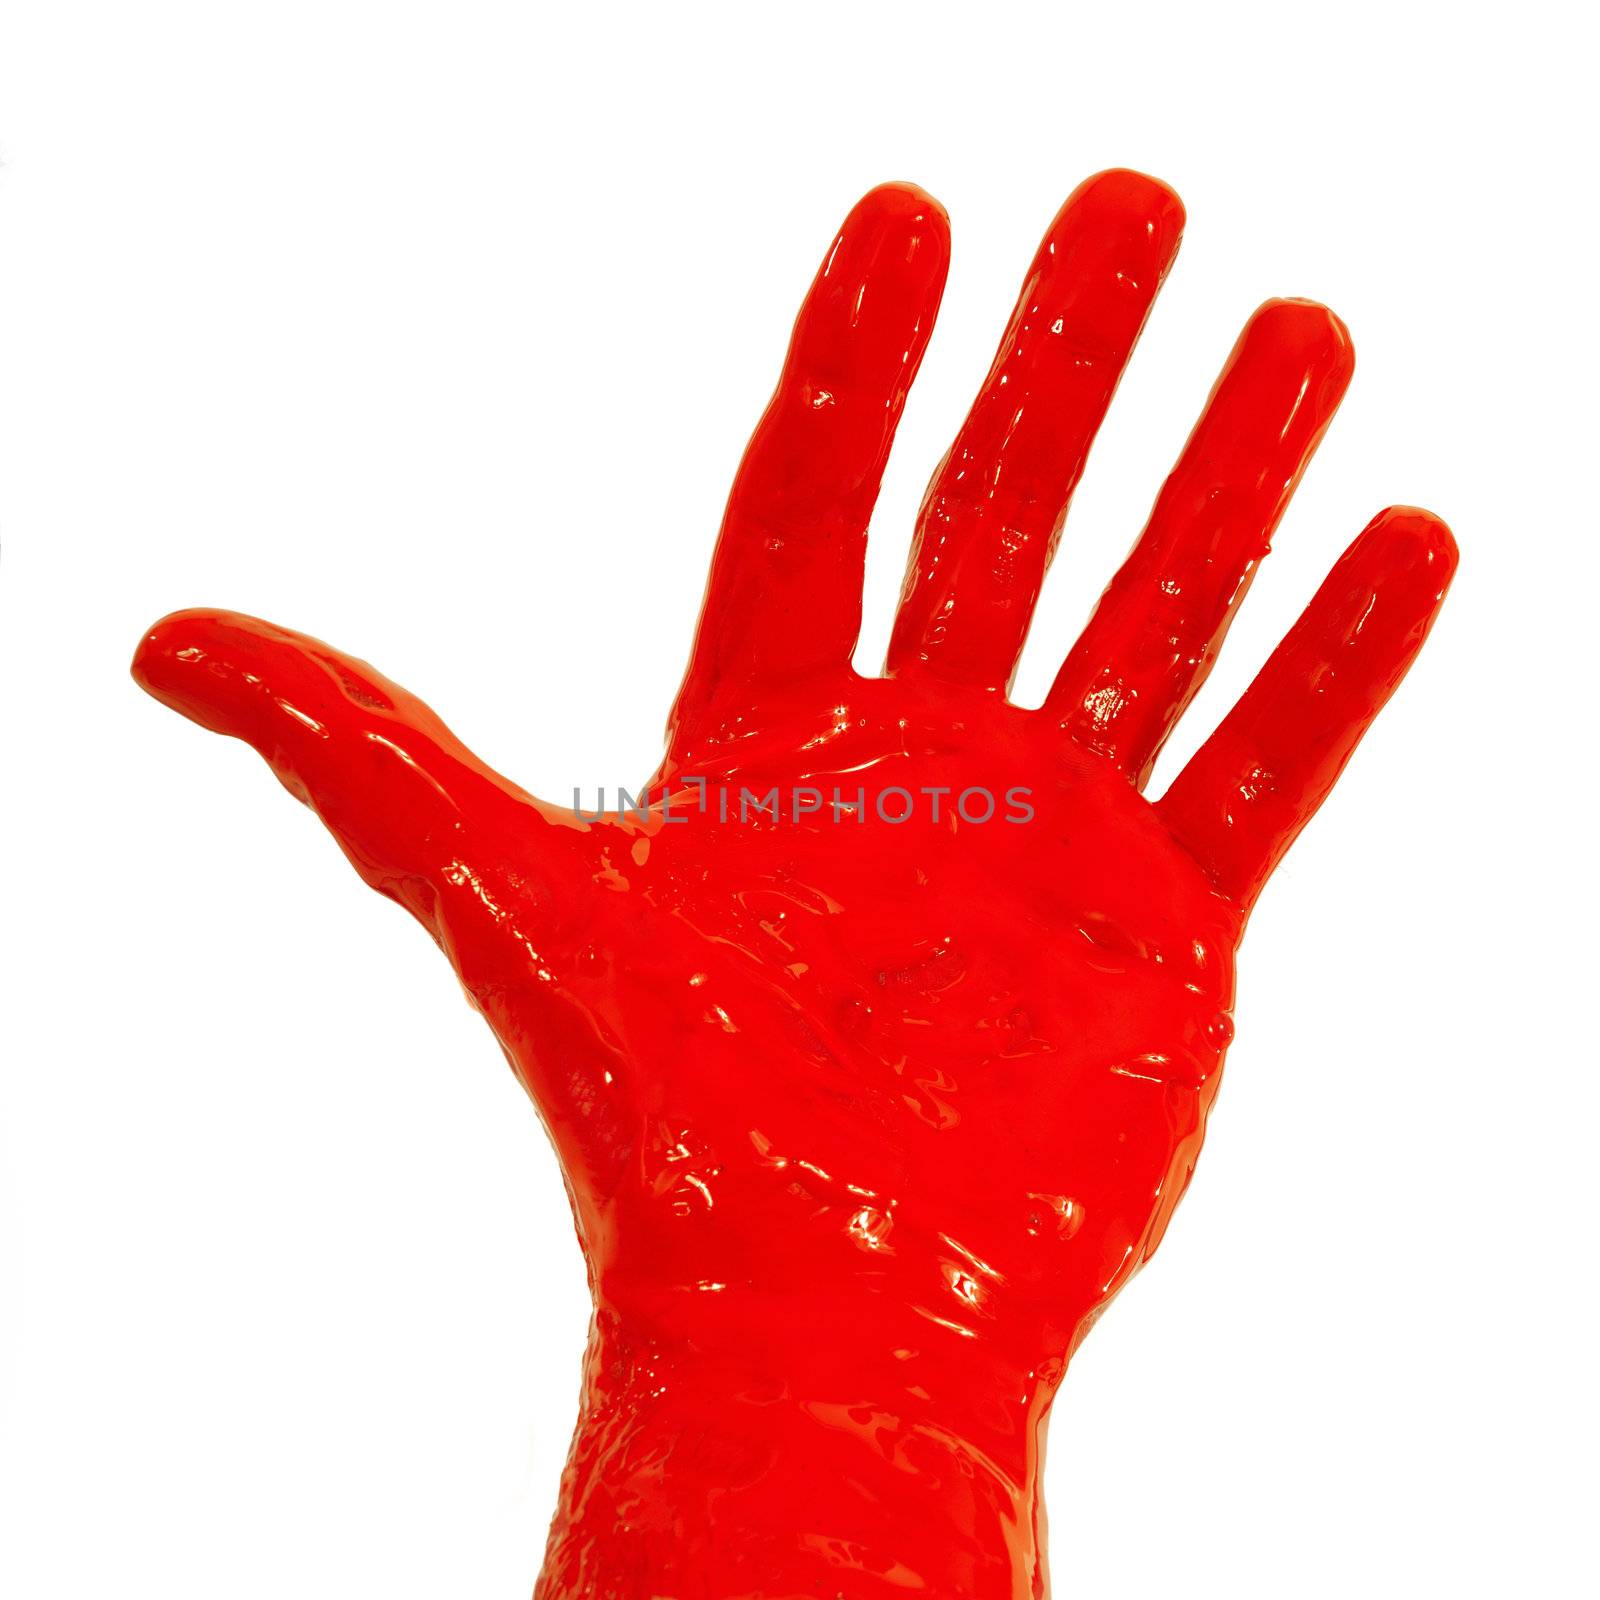 Red paint on hand by cfoto